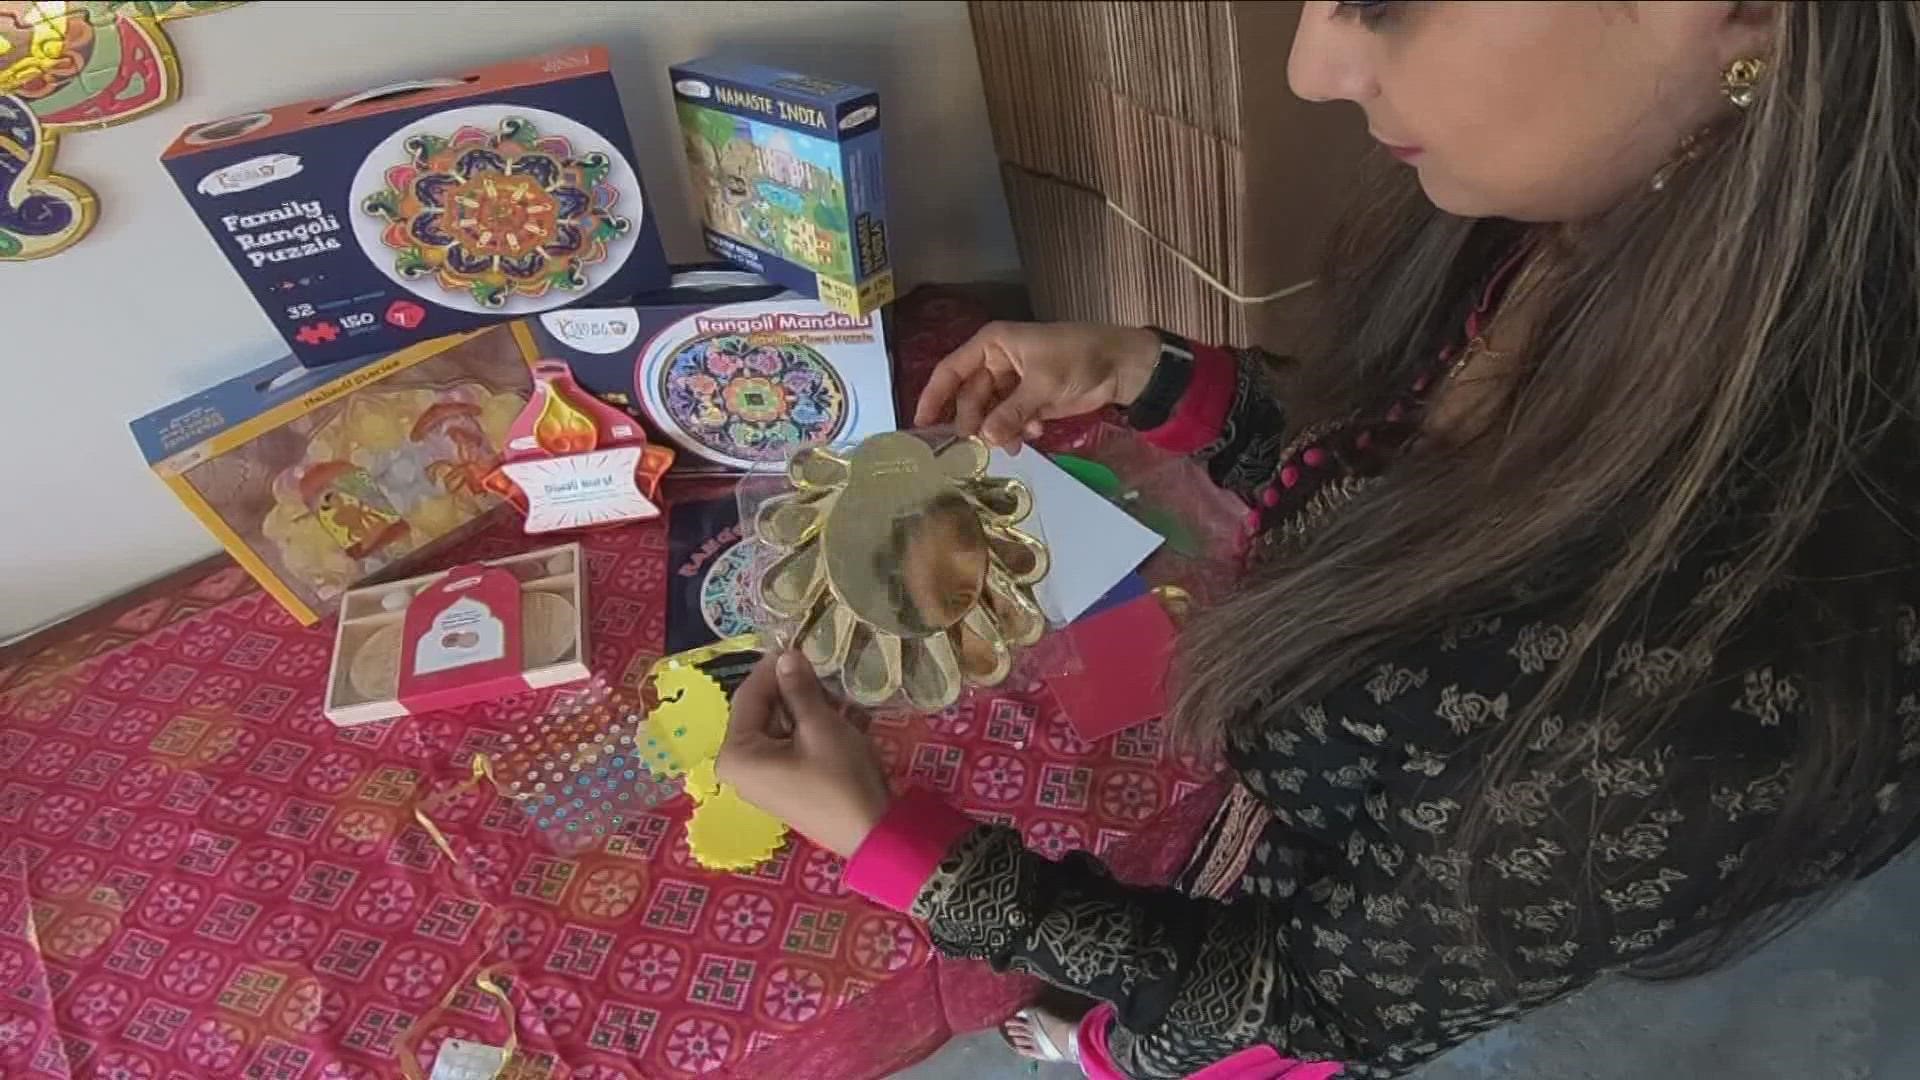 Local mom Akruti is selling puzzles and other South Asia culture educational products through her business Kulture Khazana on Nordstrom and Target's websites.